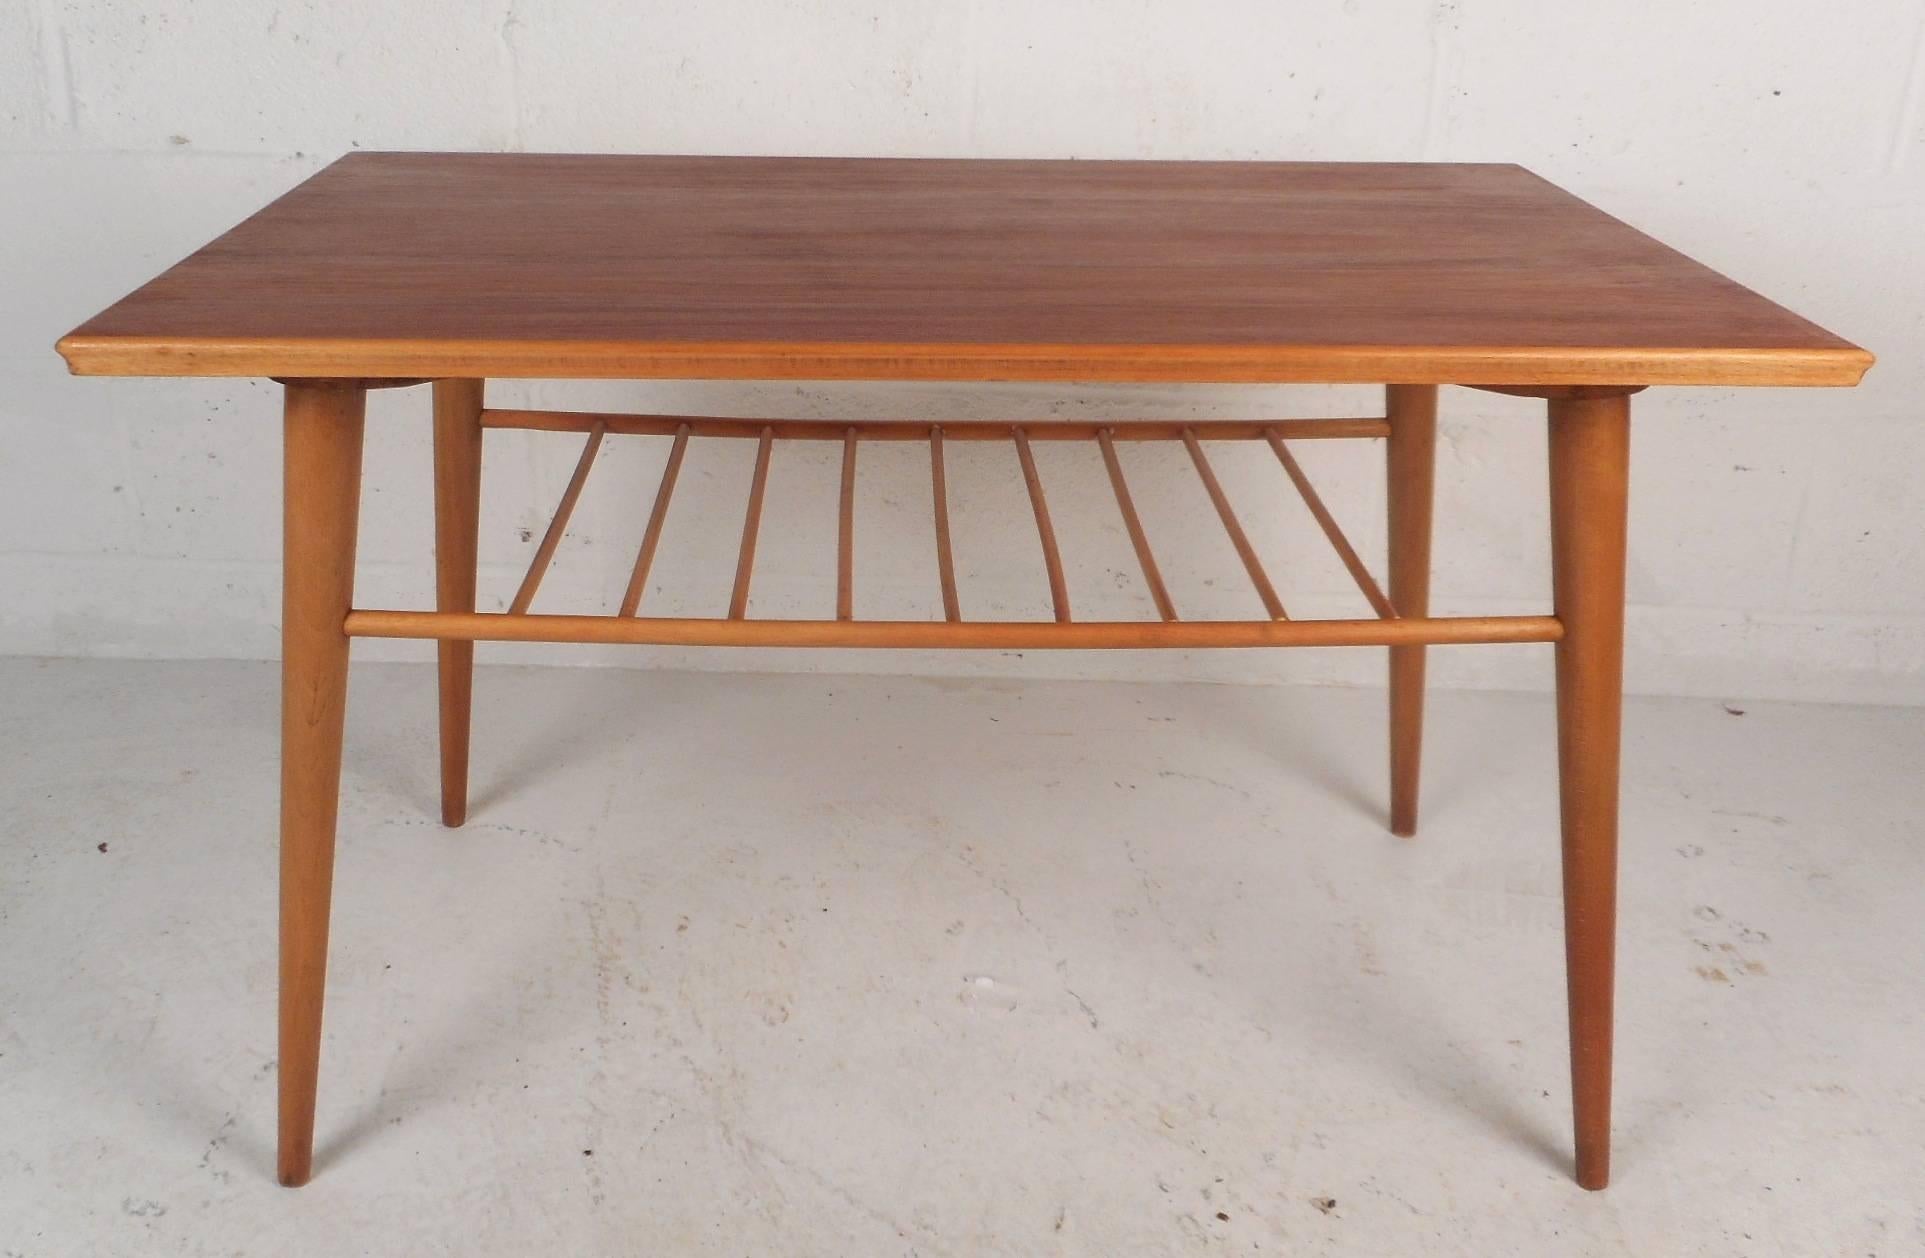 This gorgeous vintage modern end table features a unique spindle shelf underneath the top for added storage. Sleek design has gorgeous maple wood grain with long splayed and tapered legs. Elegant newly refinished Mid-Century table with unusual edges